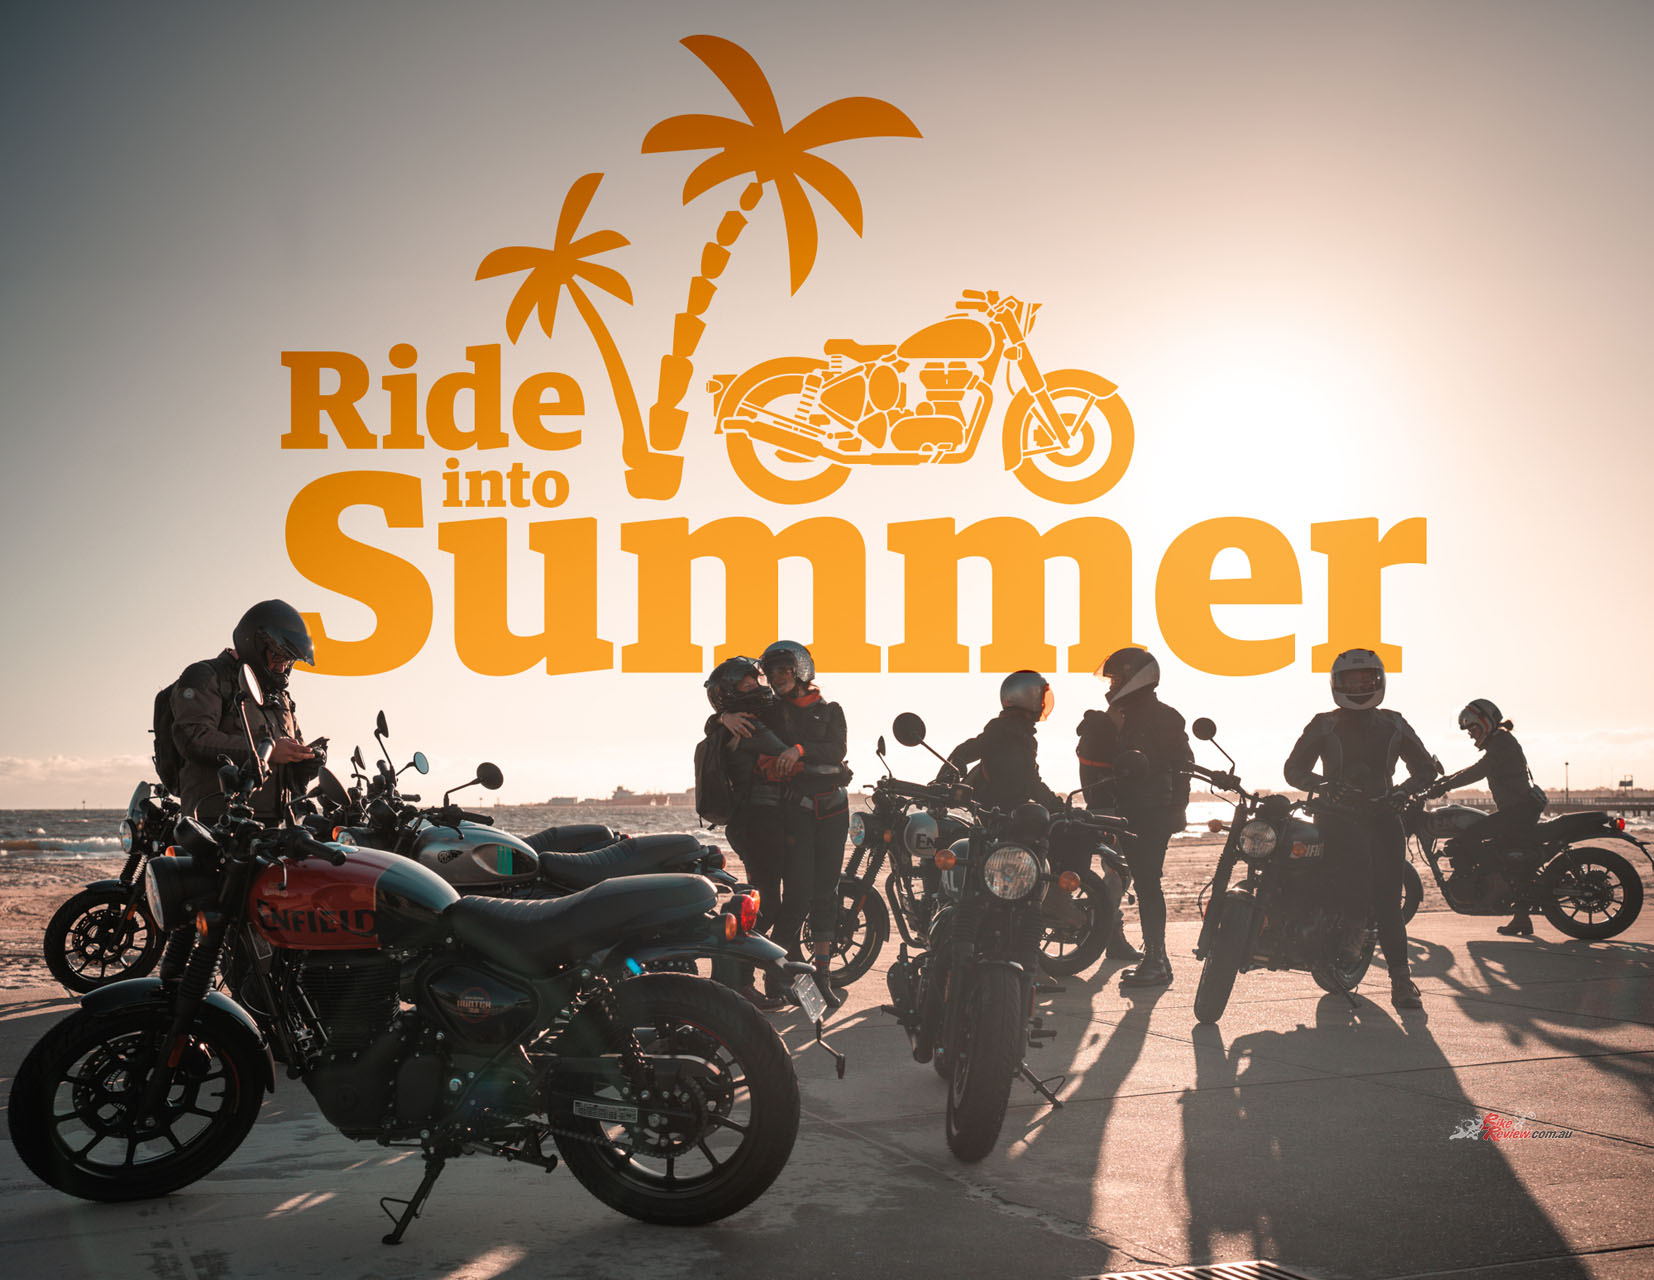 Summer has arrived, marking the official kickoff to summer adventures! So what better way to gear up for riding season than with Royal Enfield's hottest offer across the Hunter 350, Meteor 350 and Scram 411.